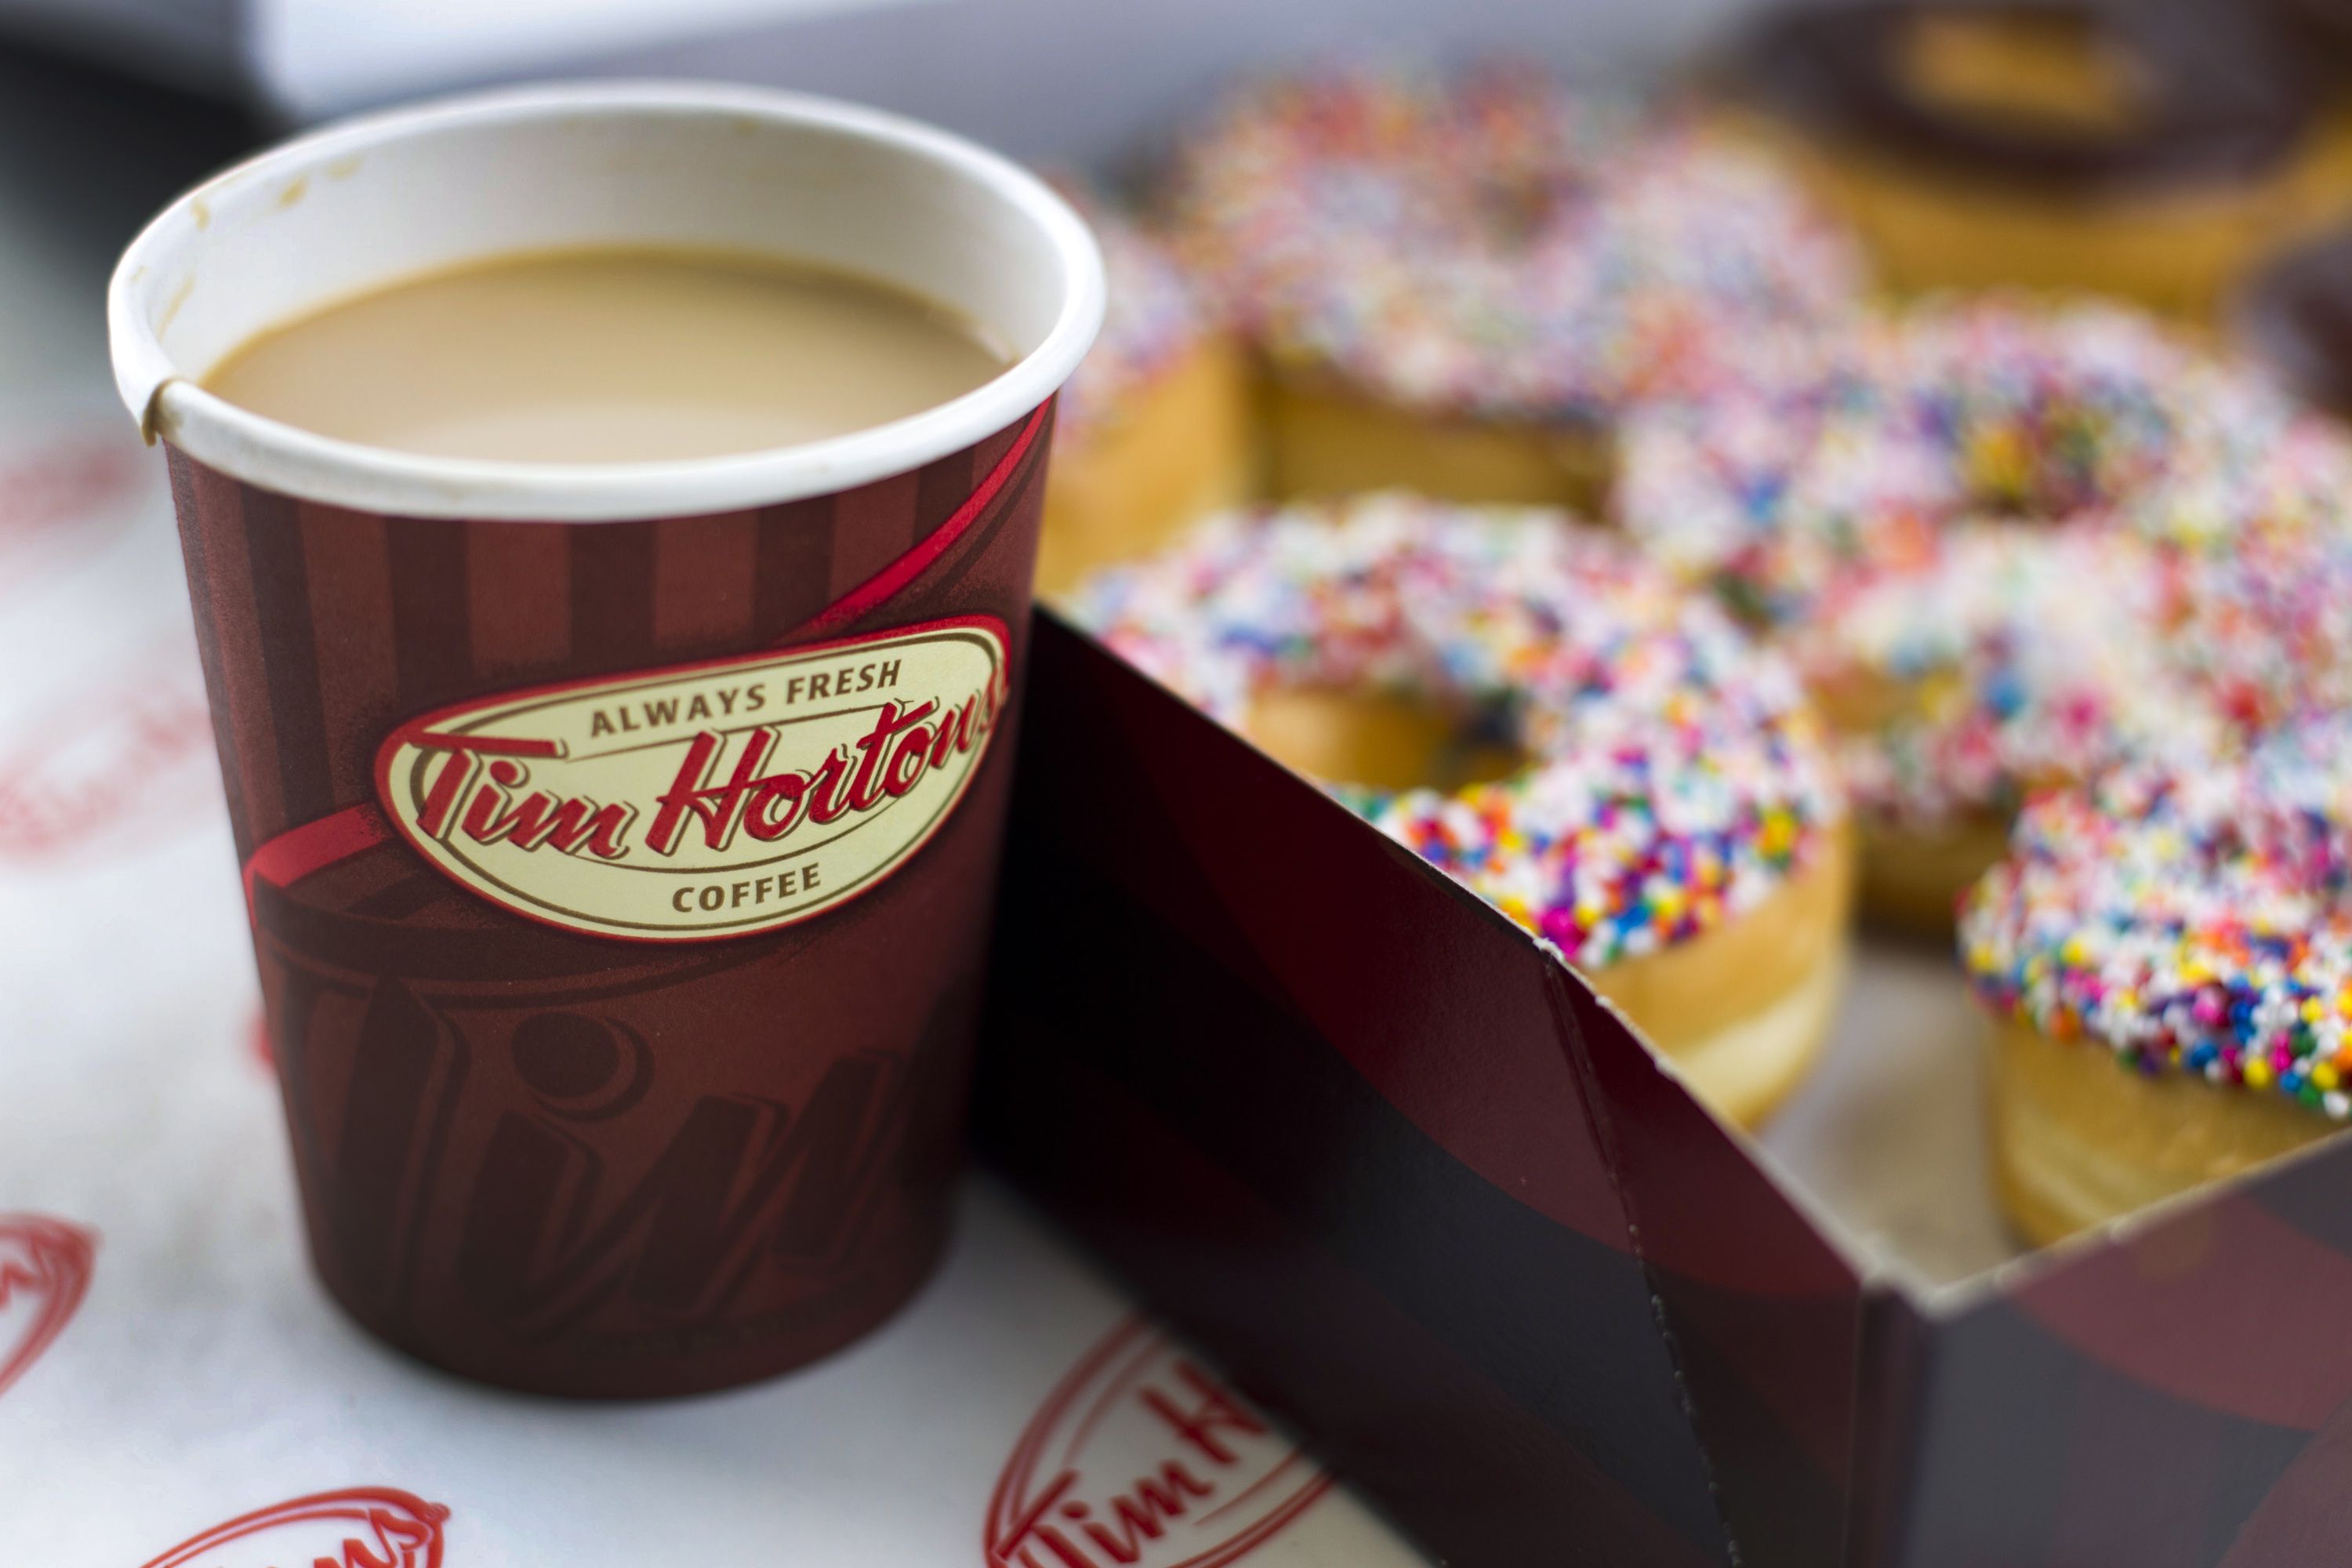 Double, double and doughnuts Tim Hortons seeks return to its roots